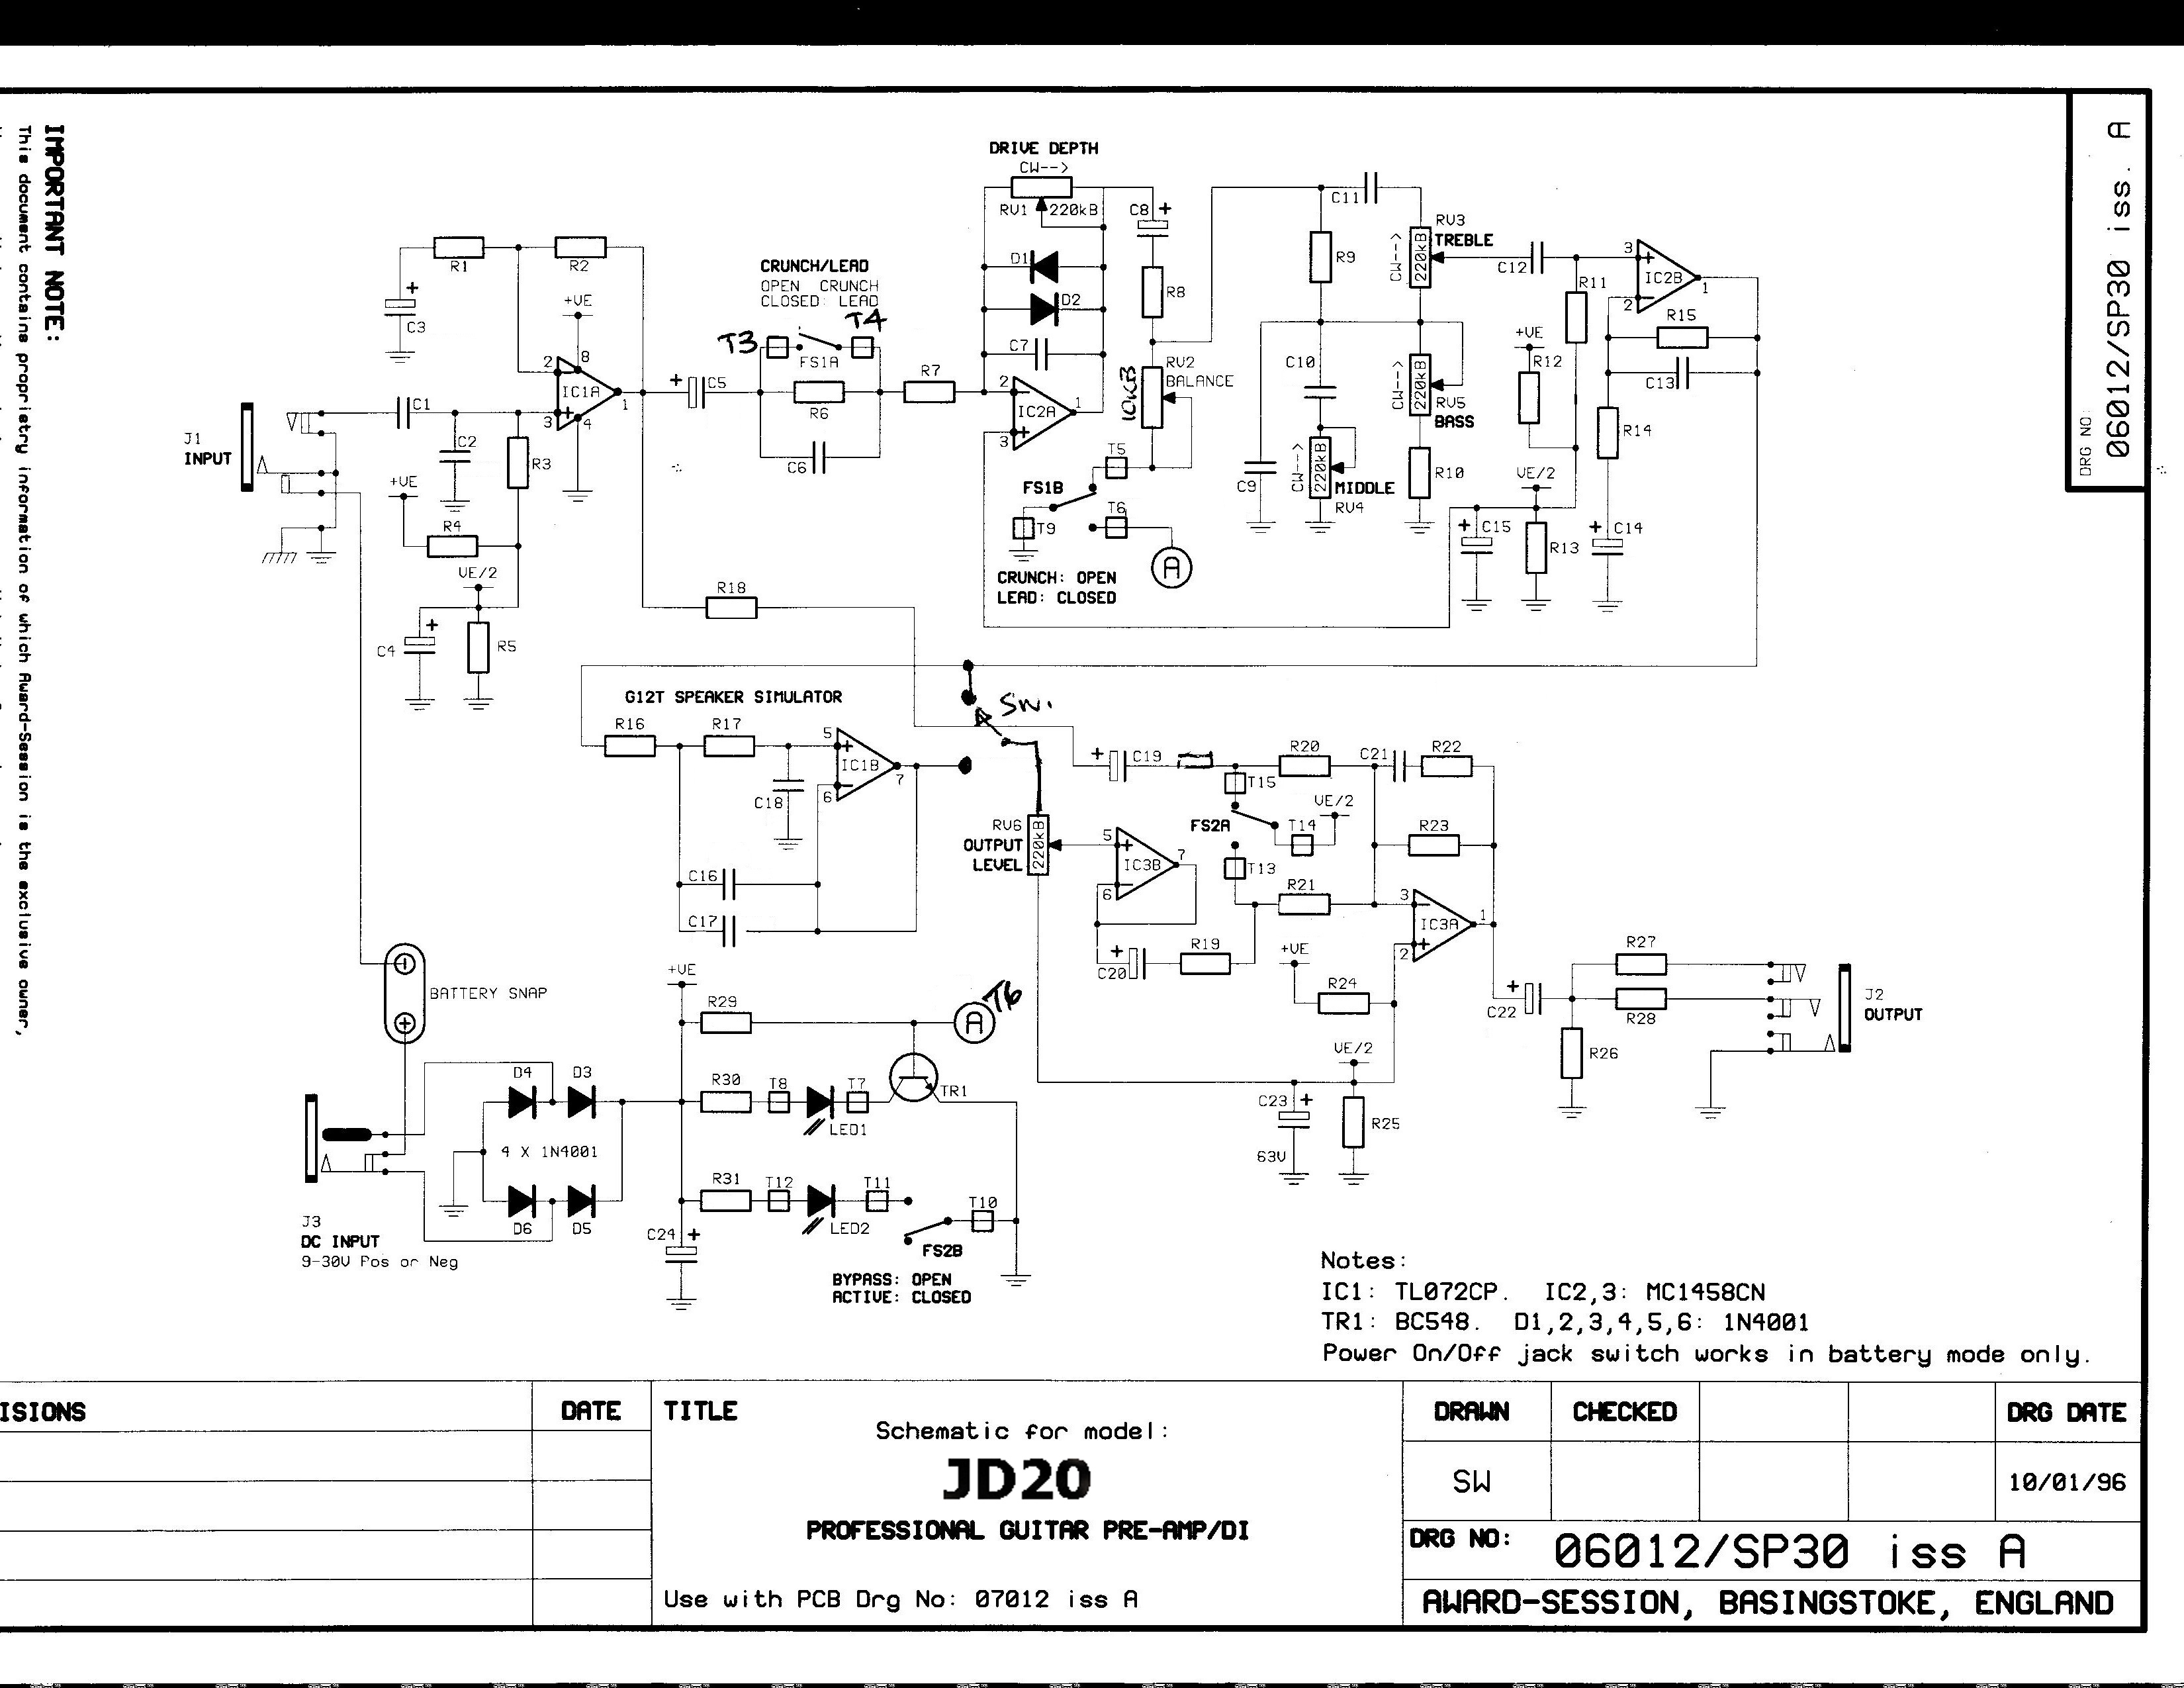 Award Session Manuals. Welcome to award-session.com ... roland kc 100 wiring diagram 